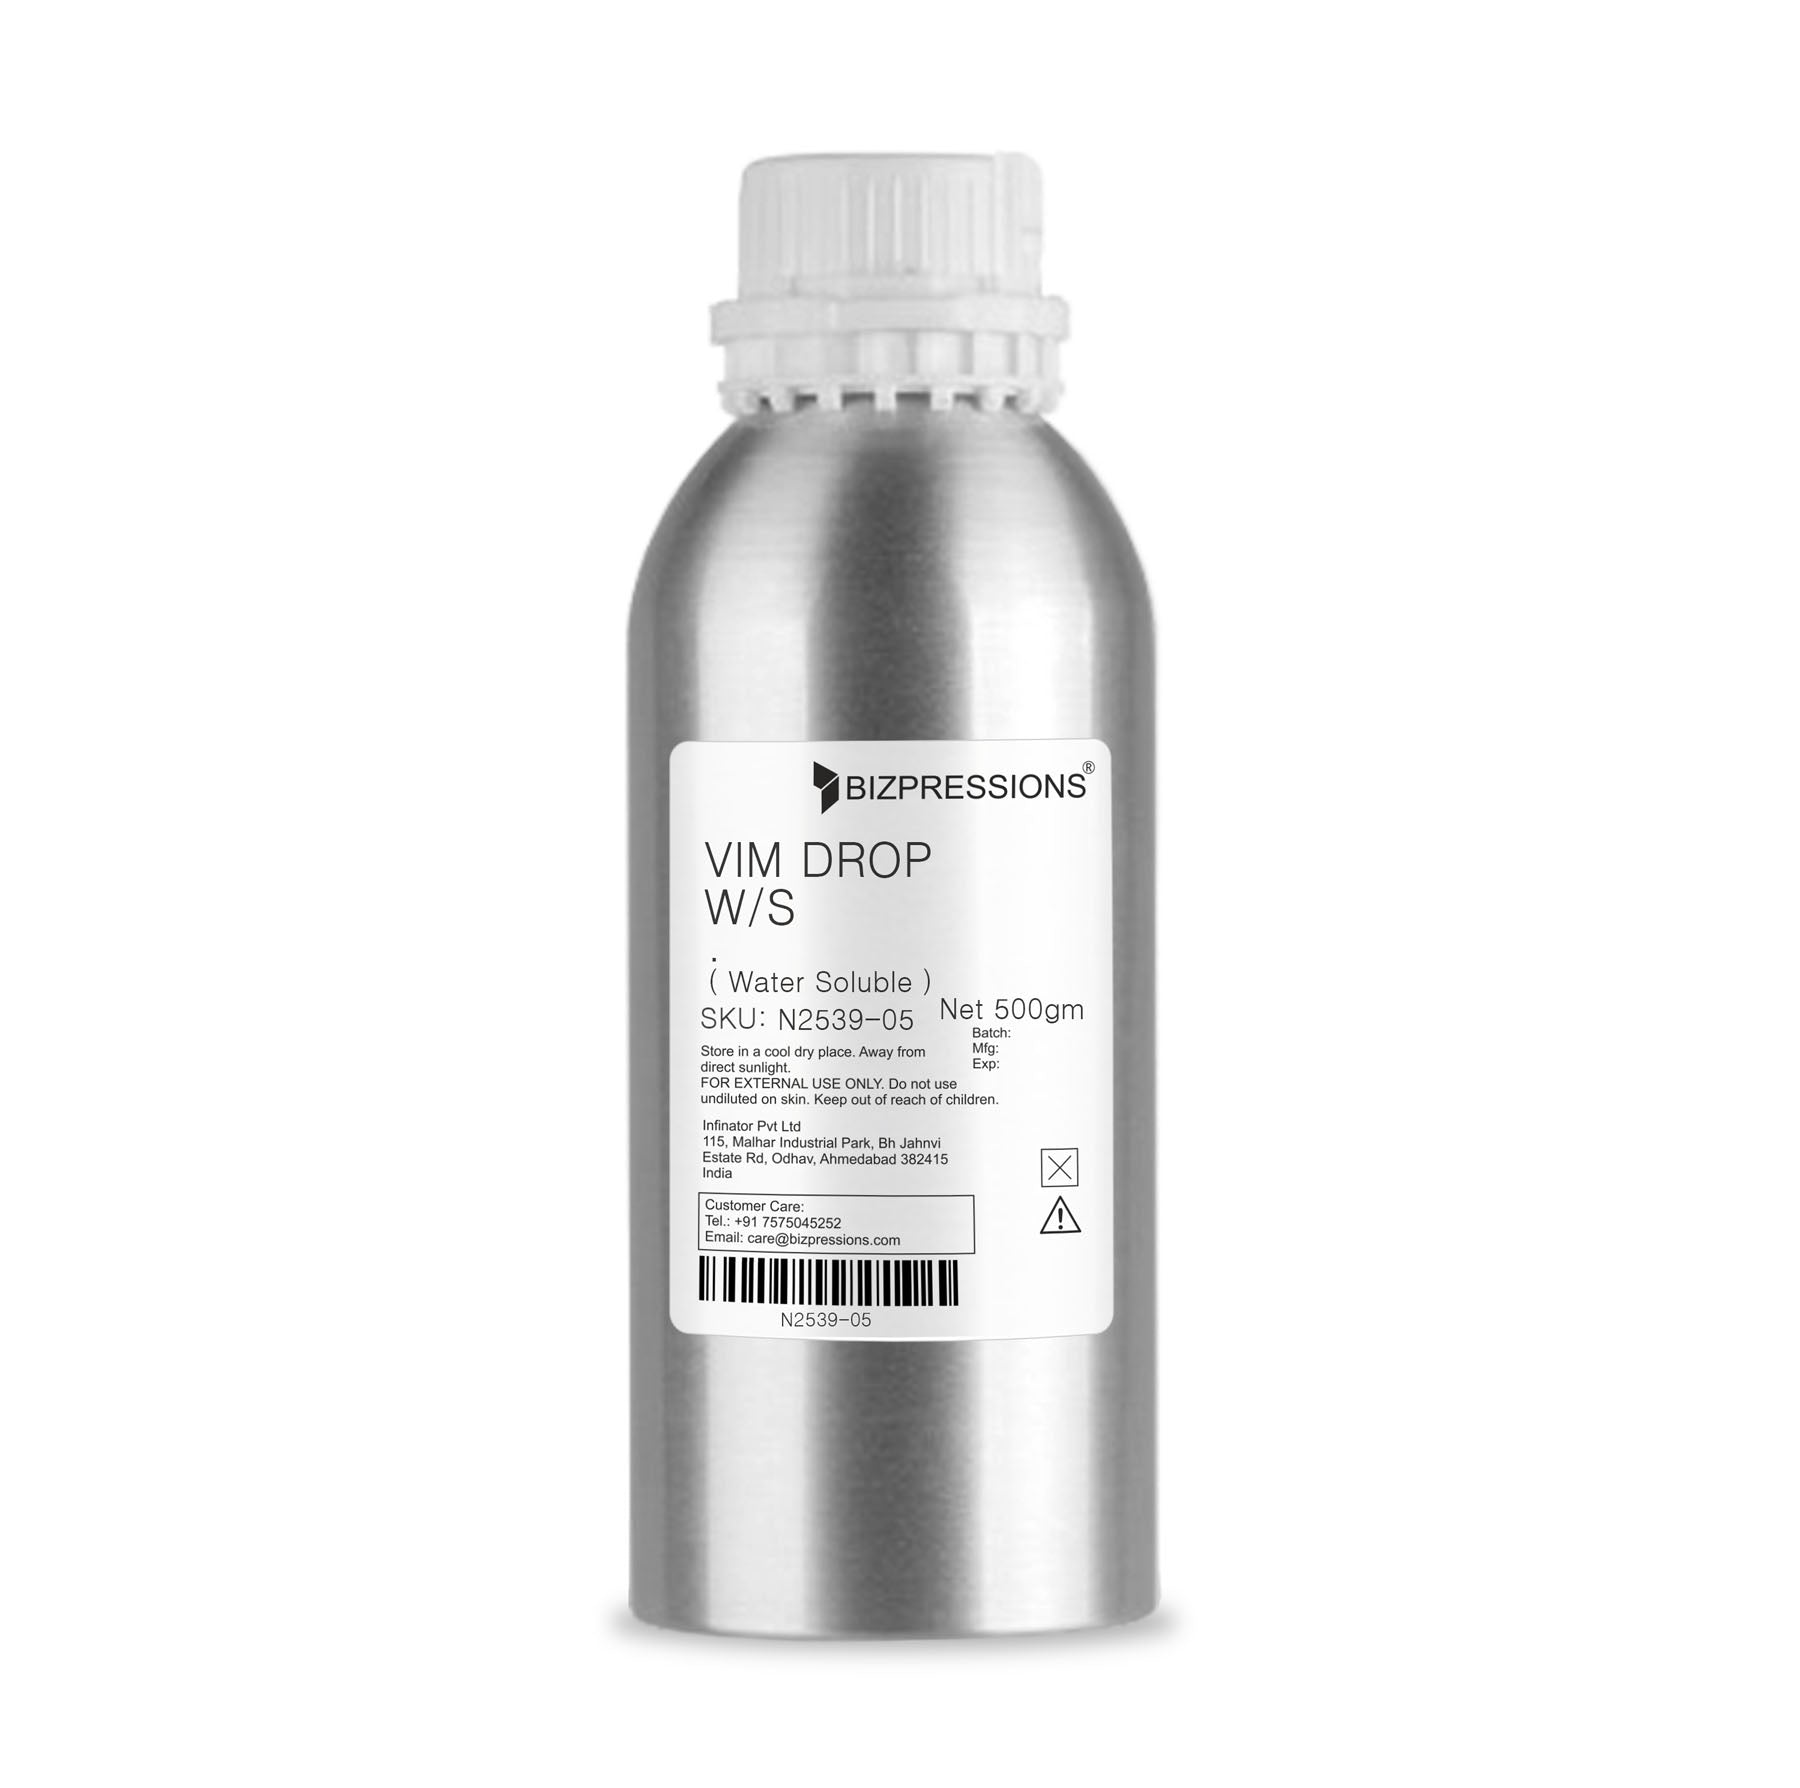 VIM DROP W/S. - Fragrance ( Water Soluble ) - 500 gm